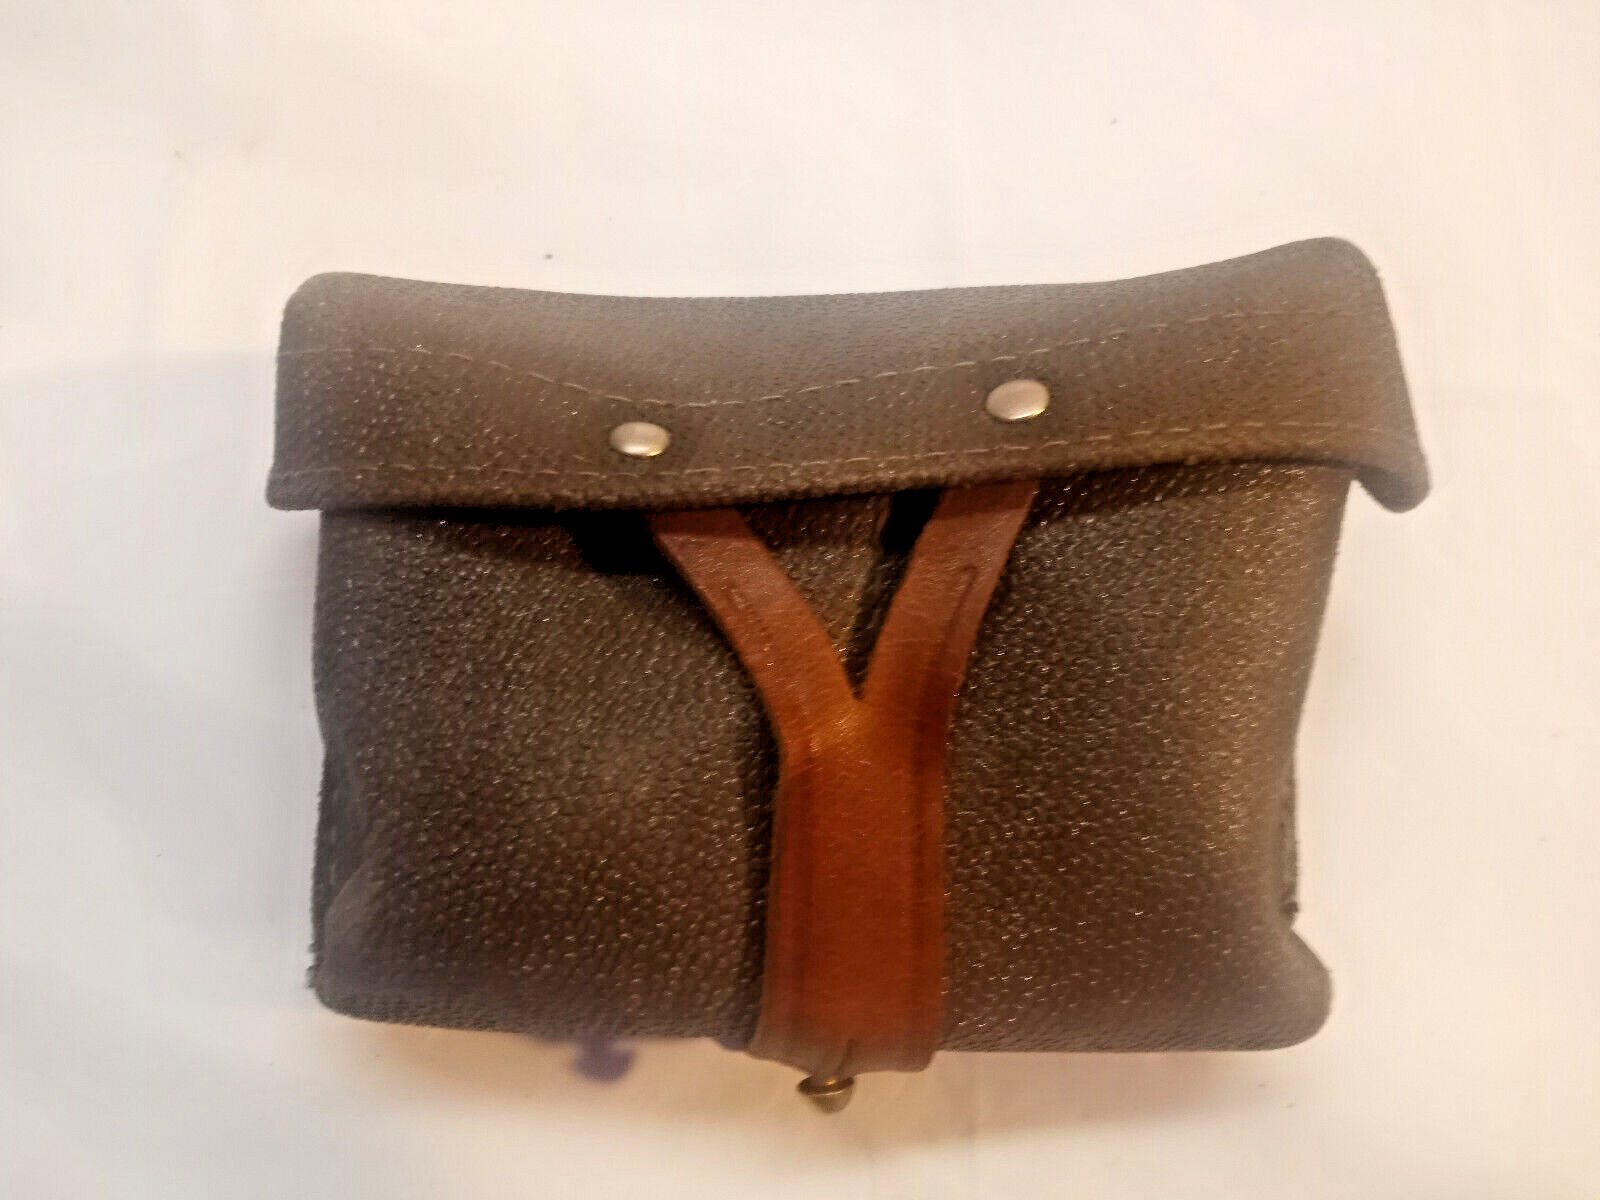 Authentic Russian Soviet Mosin Nagant Ammo Pouch Late Kirza Production 1970-80